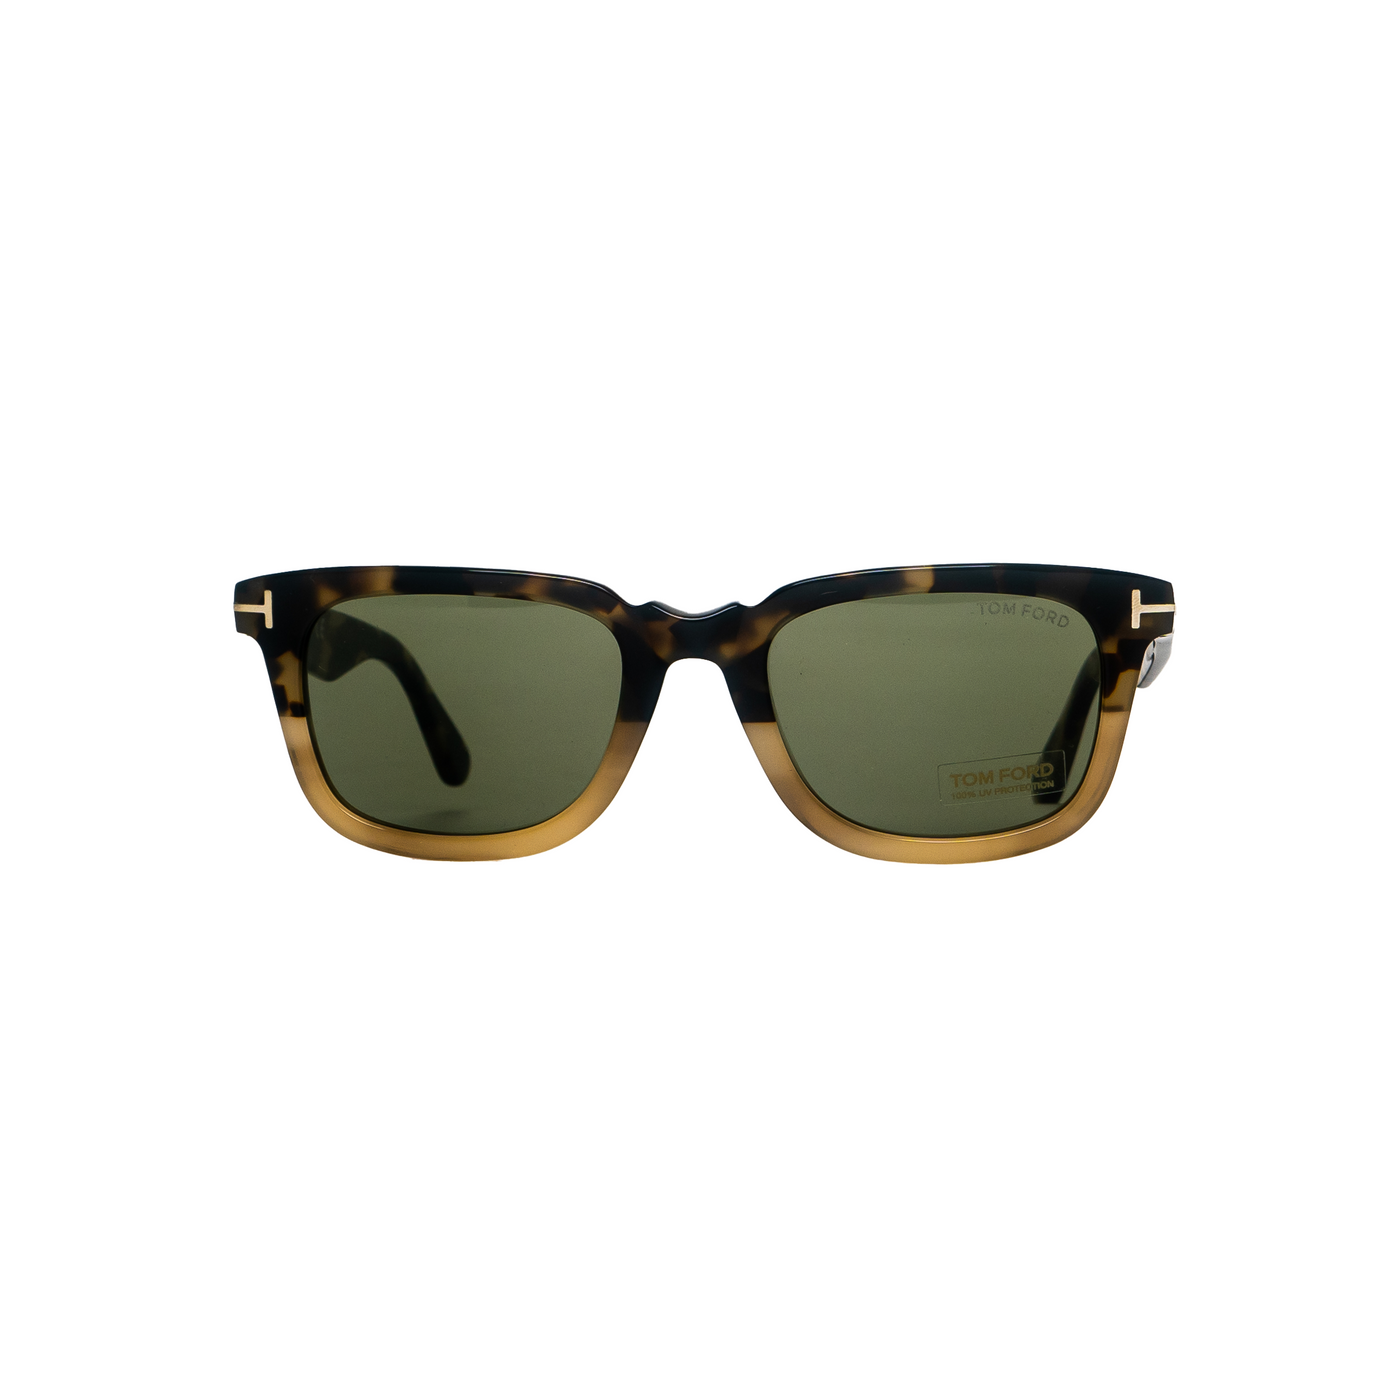 Tom Ford Sunglasses | FT081756N53 - Vision Express Optical Philippines